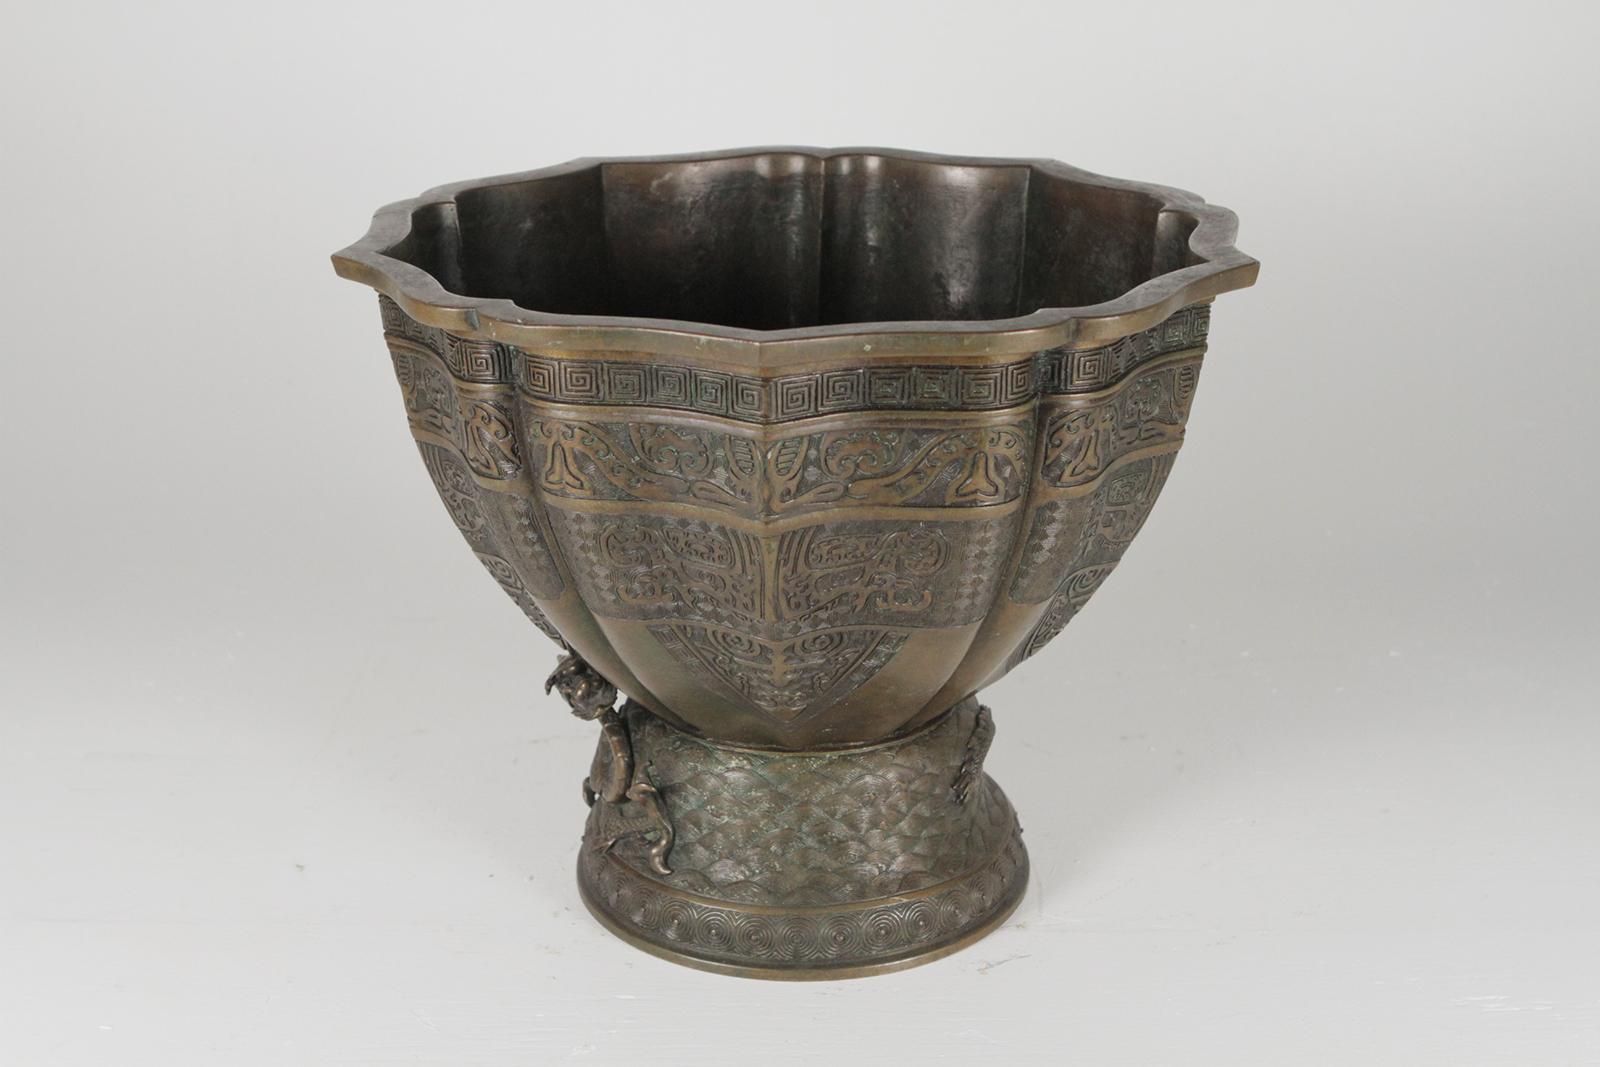 Large antique Japanese bronze planter (Chinese Style), made in Japan with appropriate well cared for use throughout, Meiji Period Japanese in the Archaistic style, bronze with a nice original patination. The scalloped form with detailed dragon